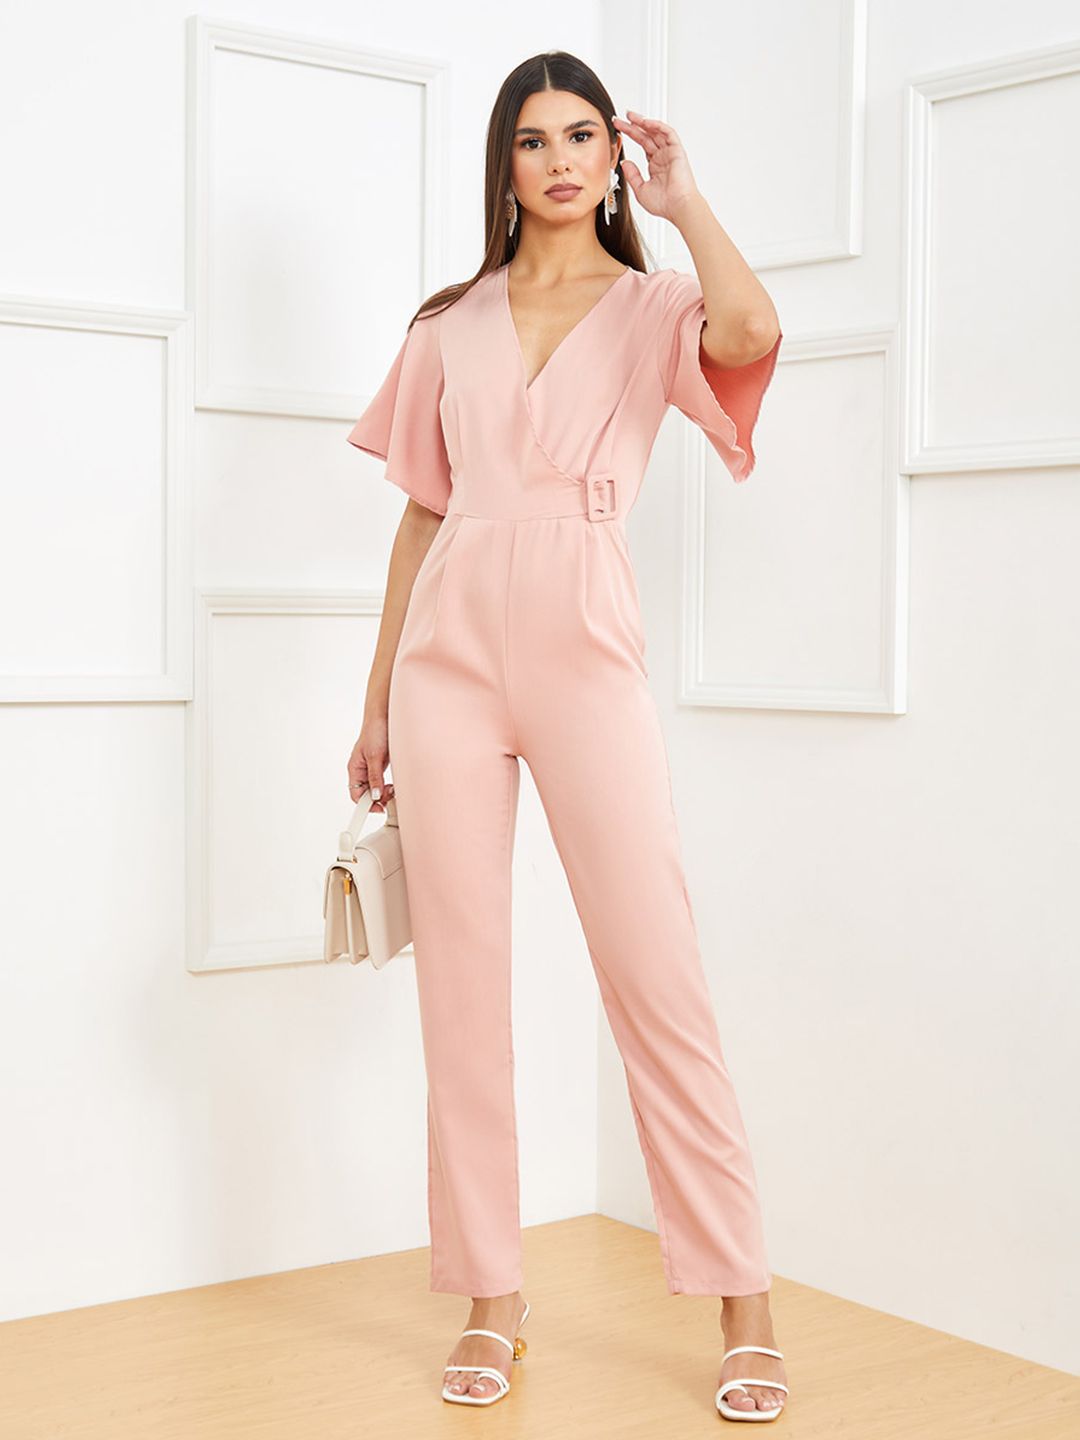 Styli Pink Basic Jumpsuit Price in India